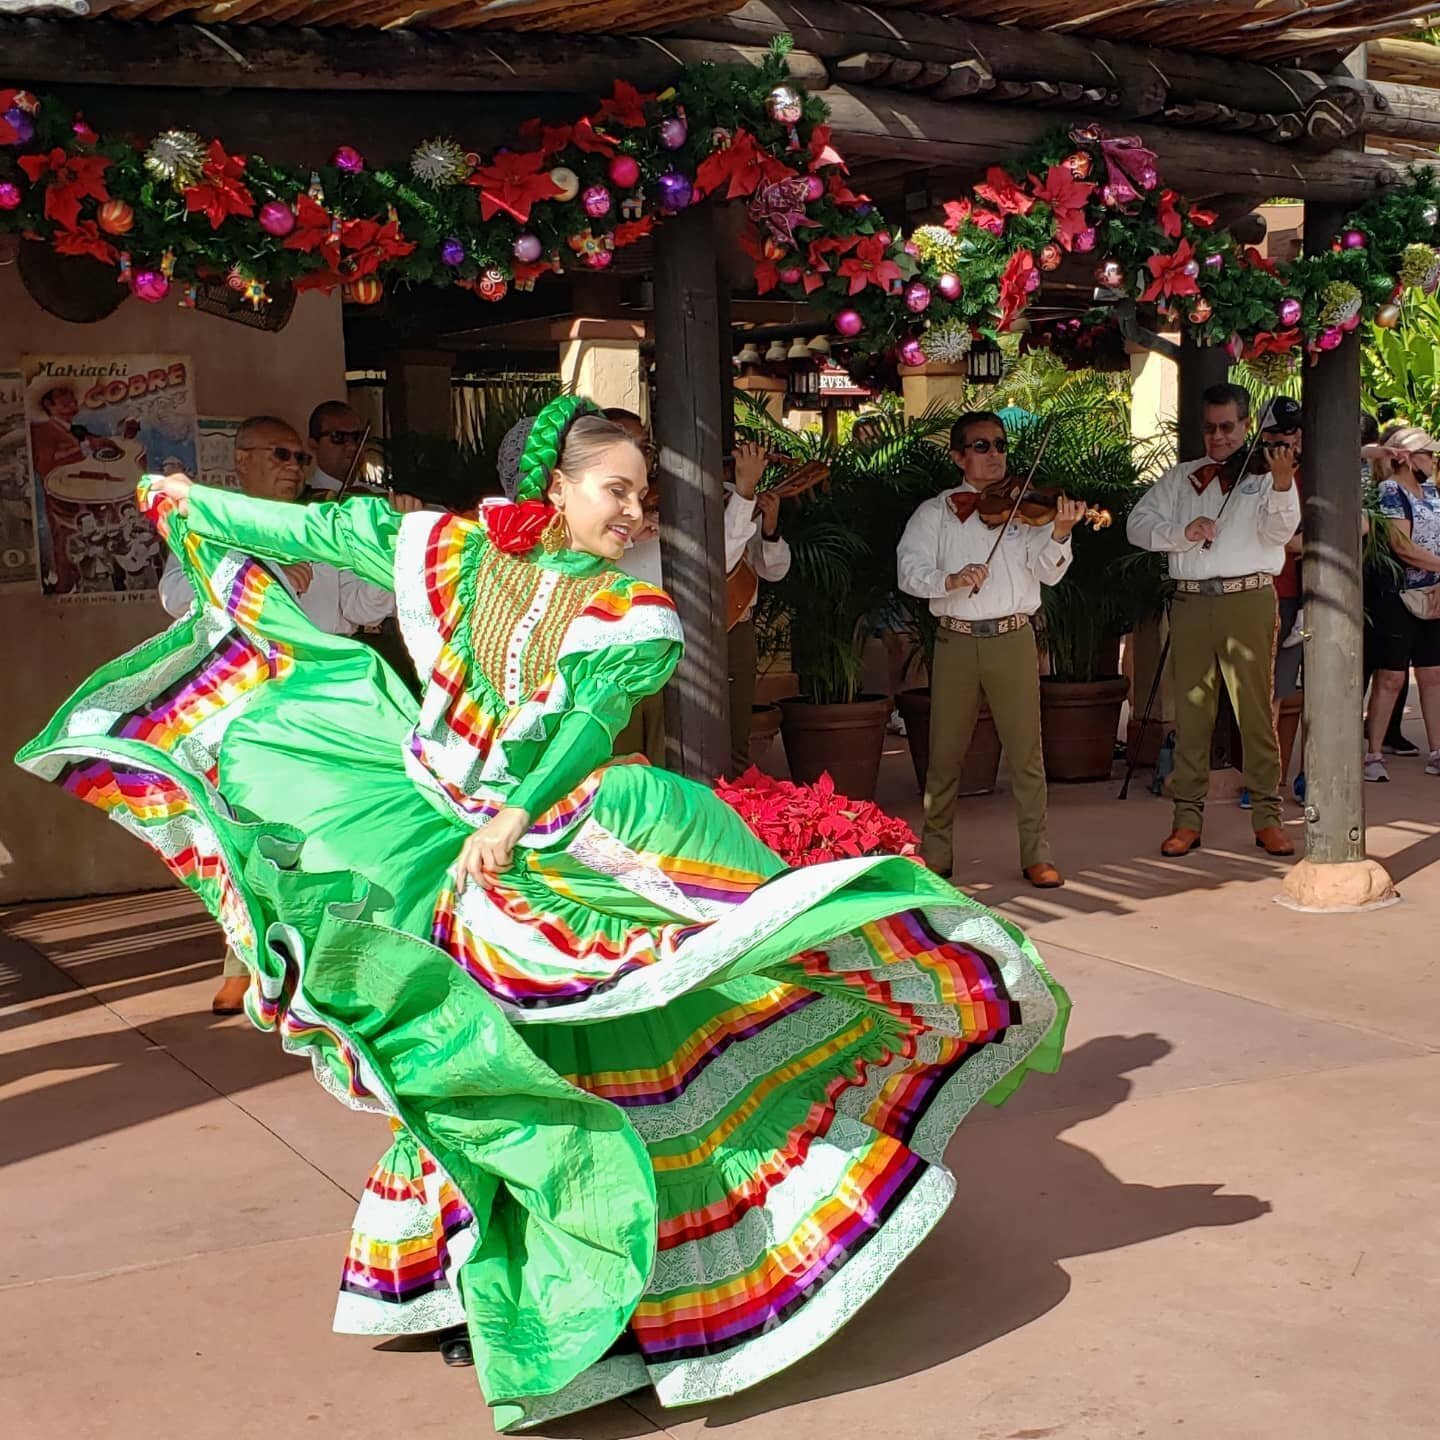 Festival of the Holidays at Epcot is always a treat. Learning some of the Holiday traditions from Mexico. 
.
.
#waltdisneyworld #epcot #holidays #tradition #christmas